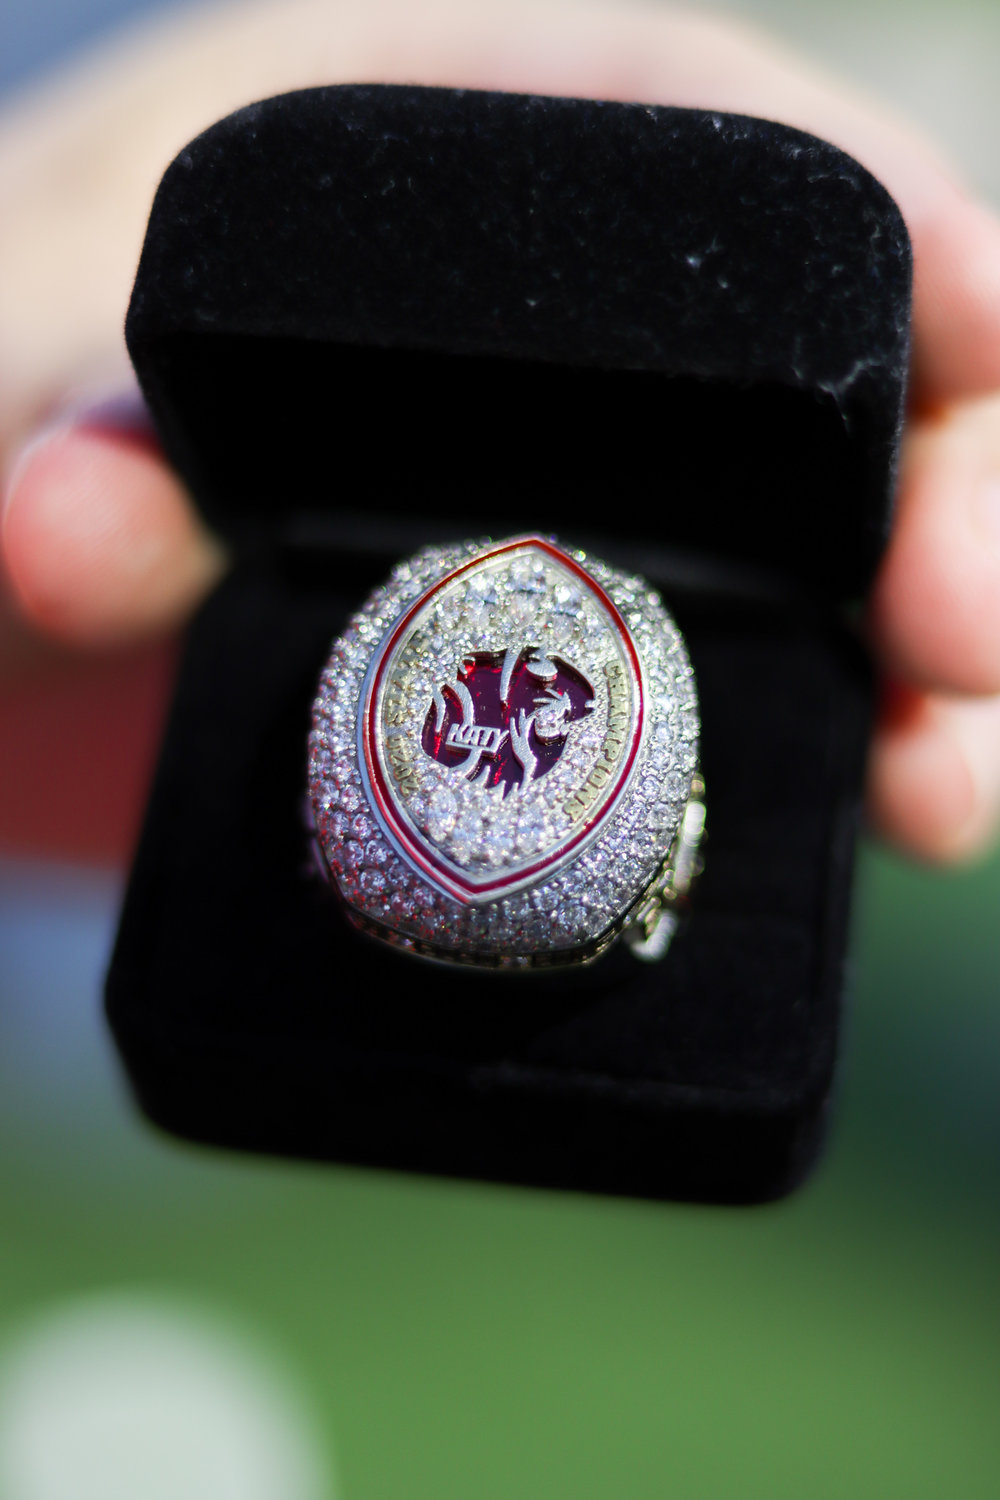 Pictured is the 2020 Katy High state championship ring.